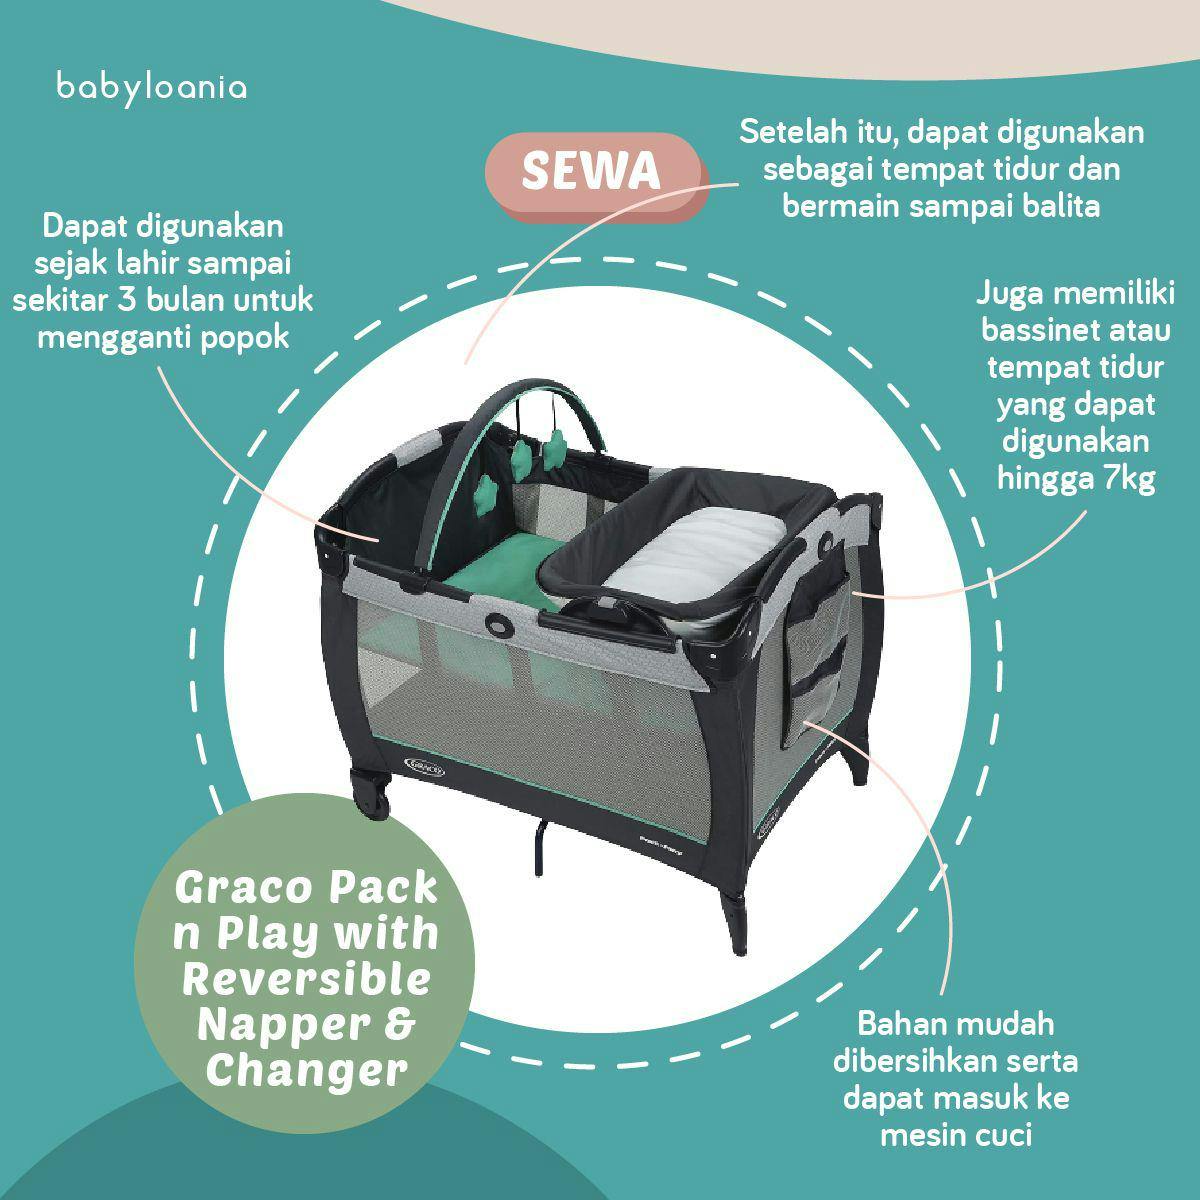 Pack n Play with Reversible Napper & Changer